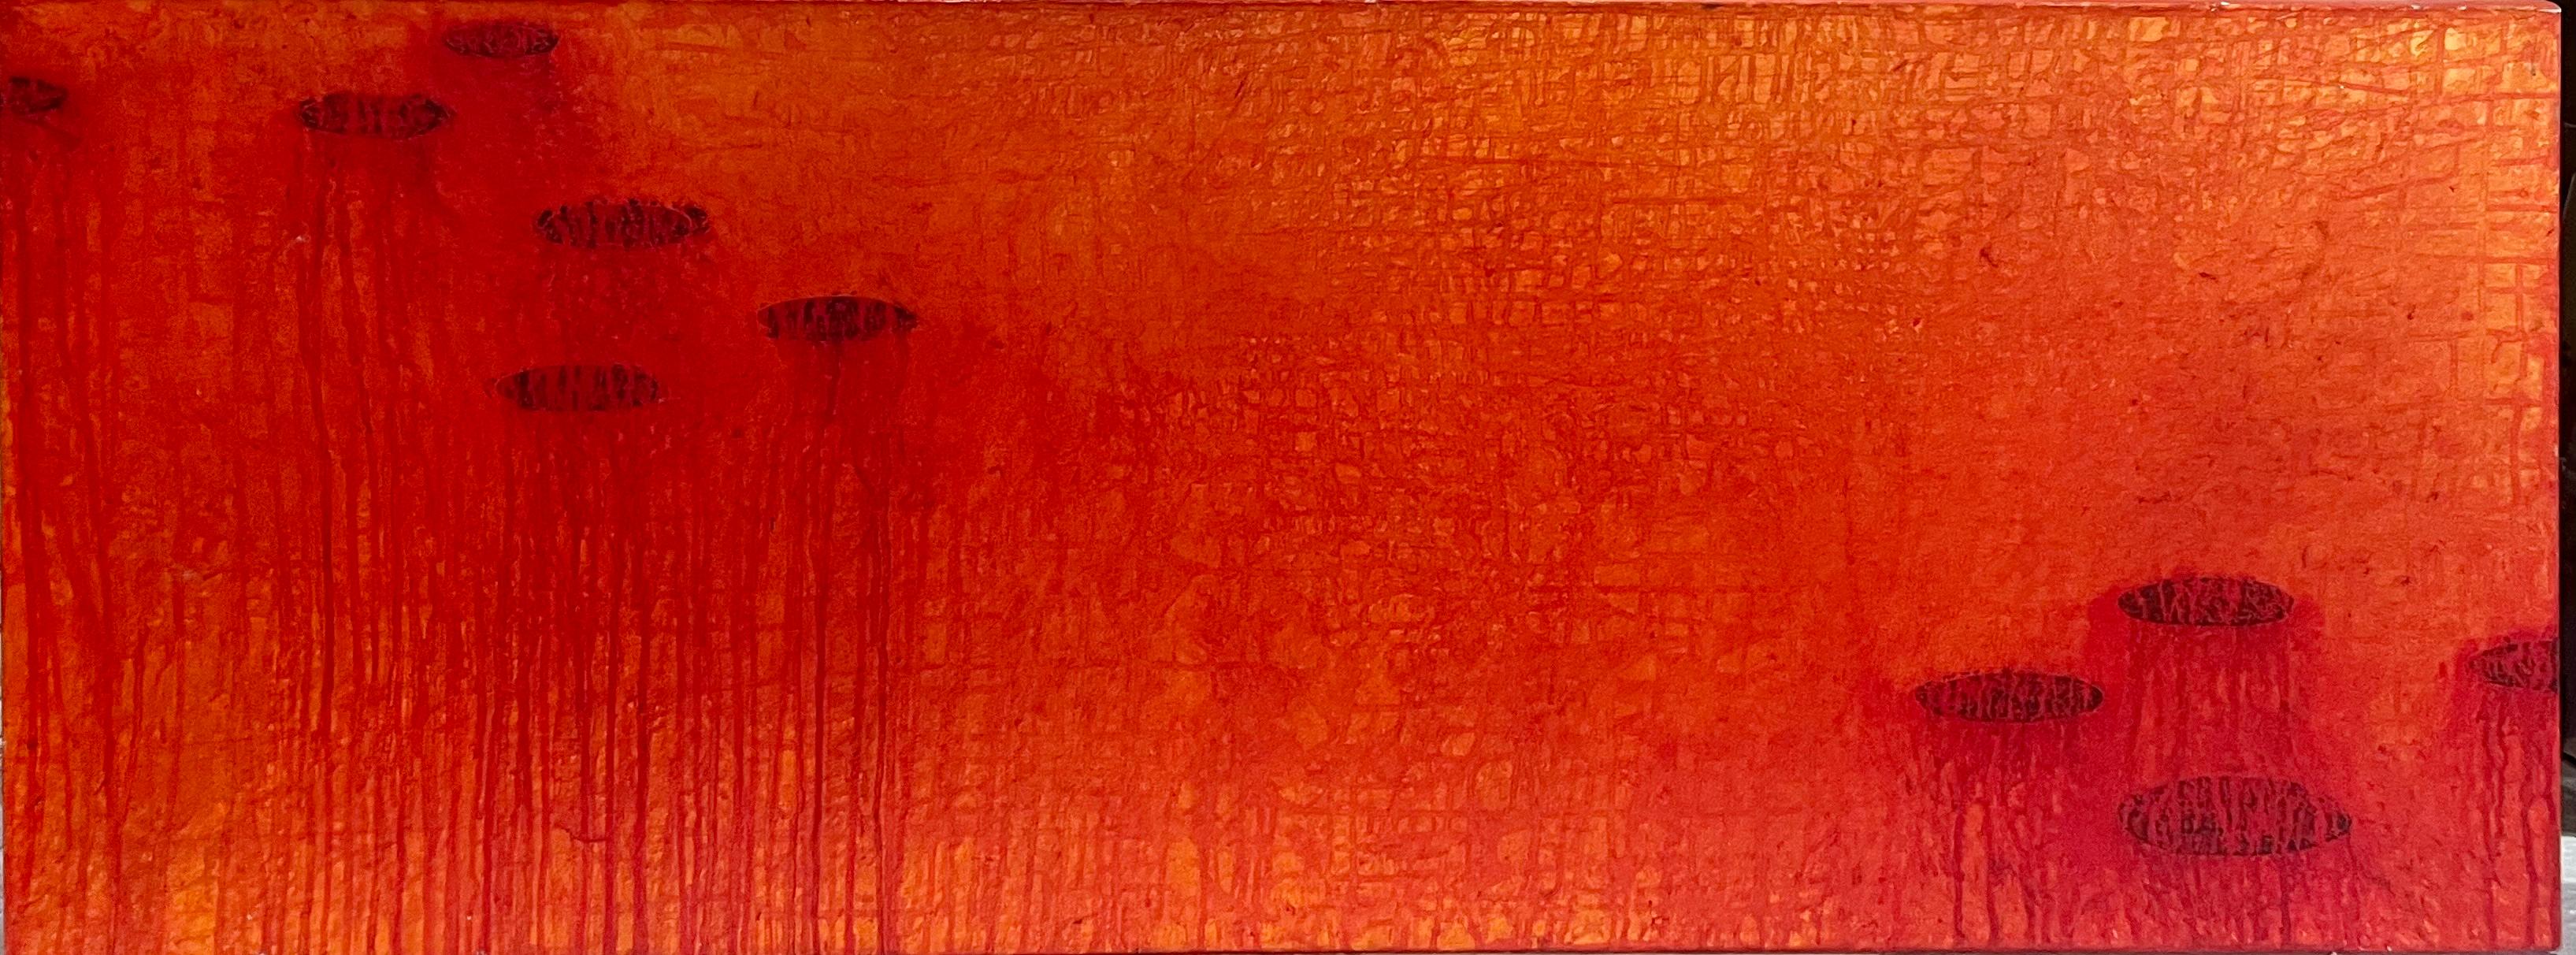 Bruce tolman Abstract Painting - Mid Century Modern Abstract Contemporary Red Hughes “Poppy Pond”